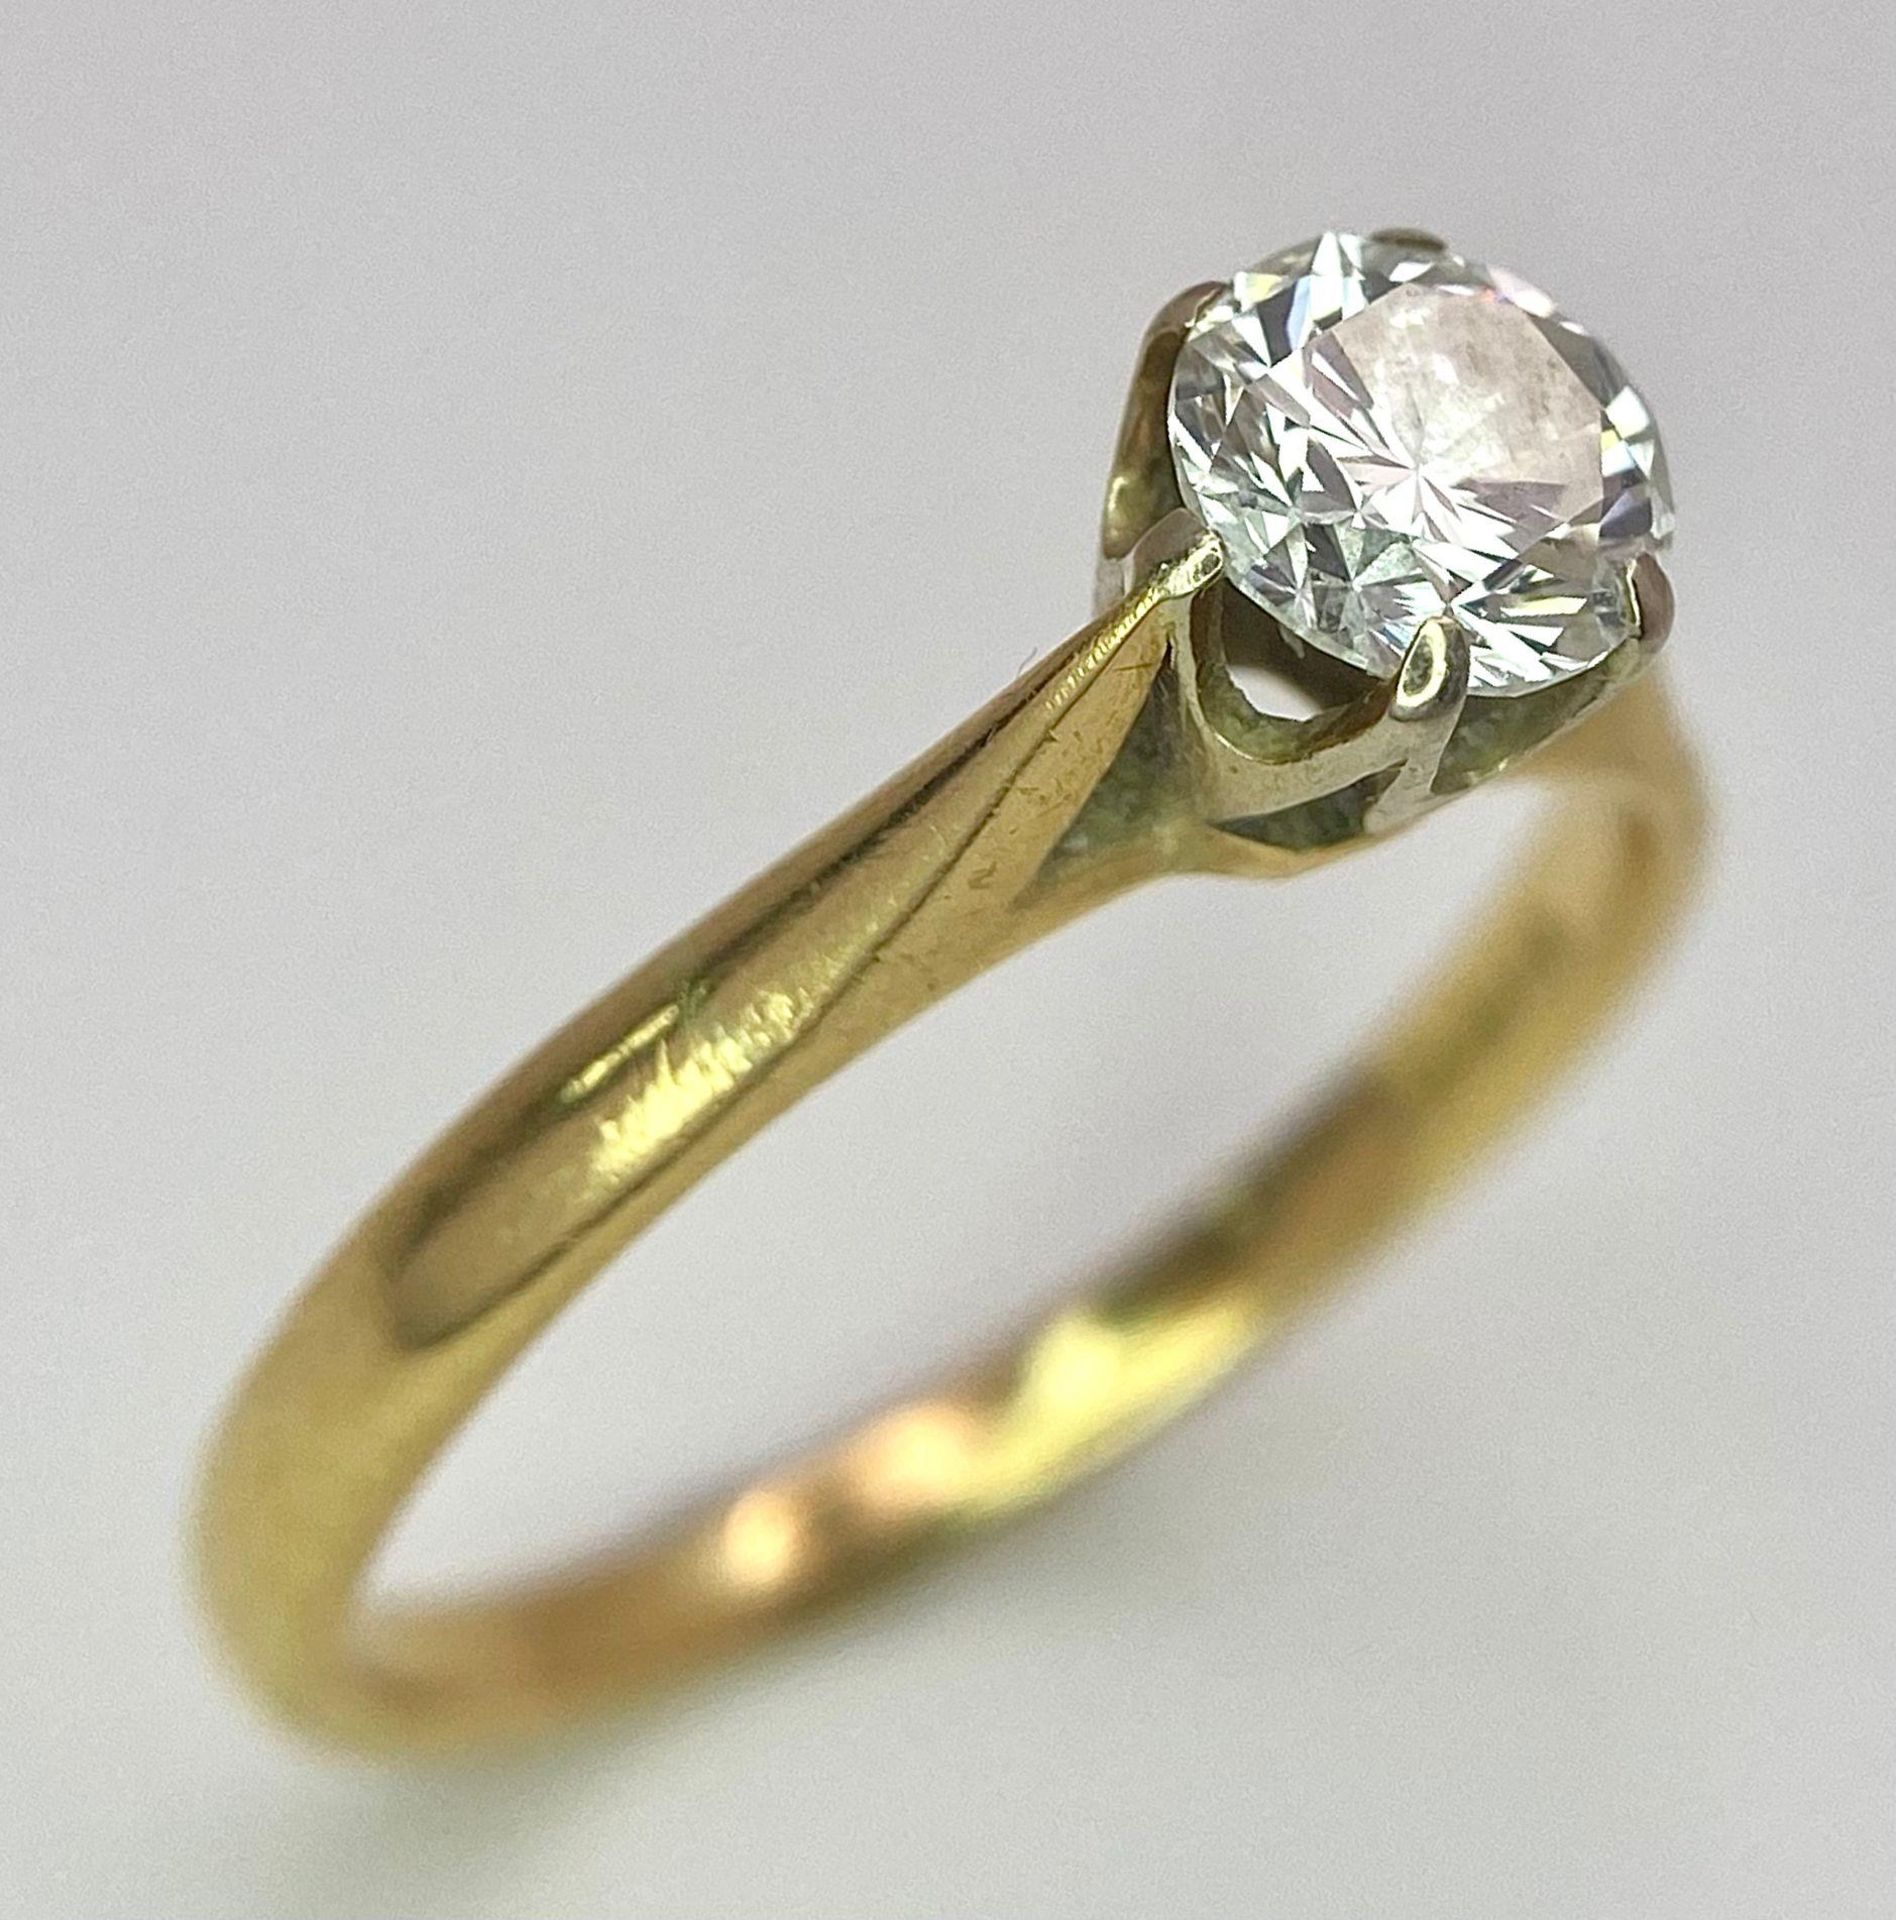 An 18K Yellow Gold Diamond Solitaire Ring. 0.75ct brilliant round cut diamond. Size N. 2.65g total - Image 3 of 6